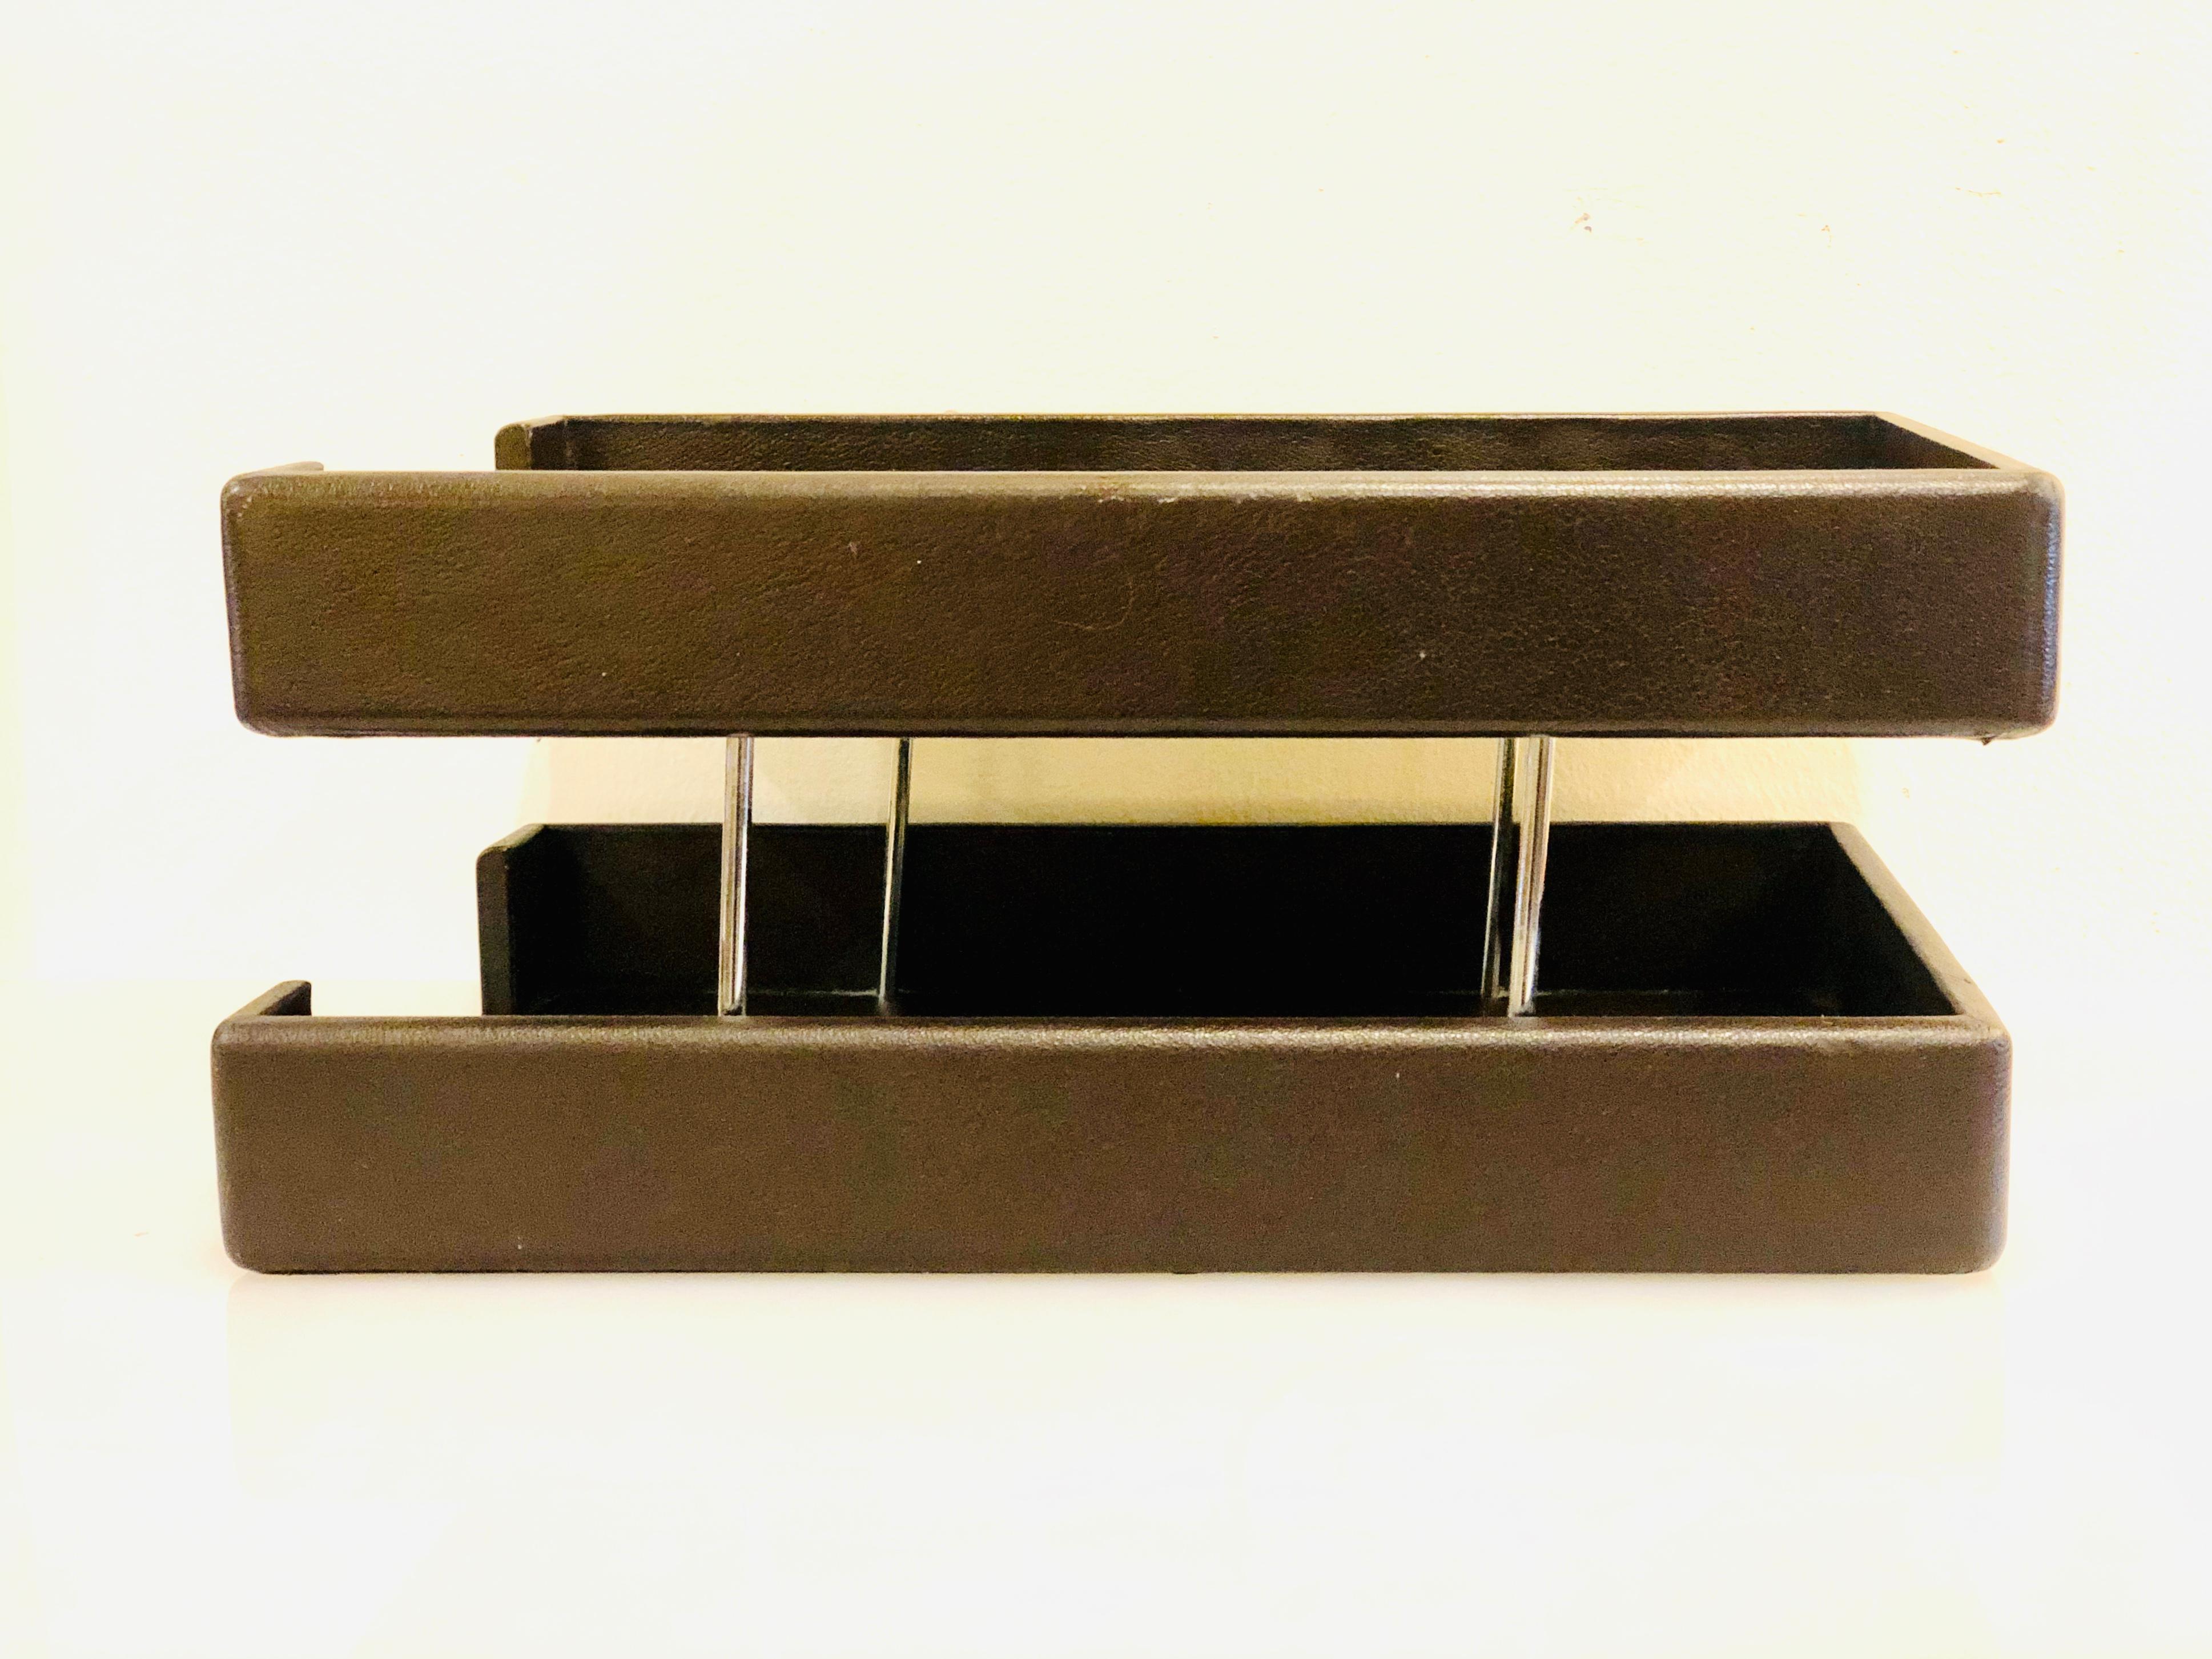 Double paper tray by Smokador distributed by Knoll in leather wrap with chrome accents, circa 1970s.